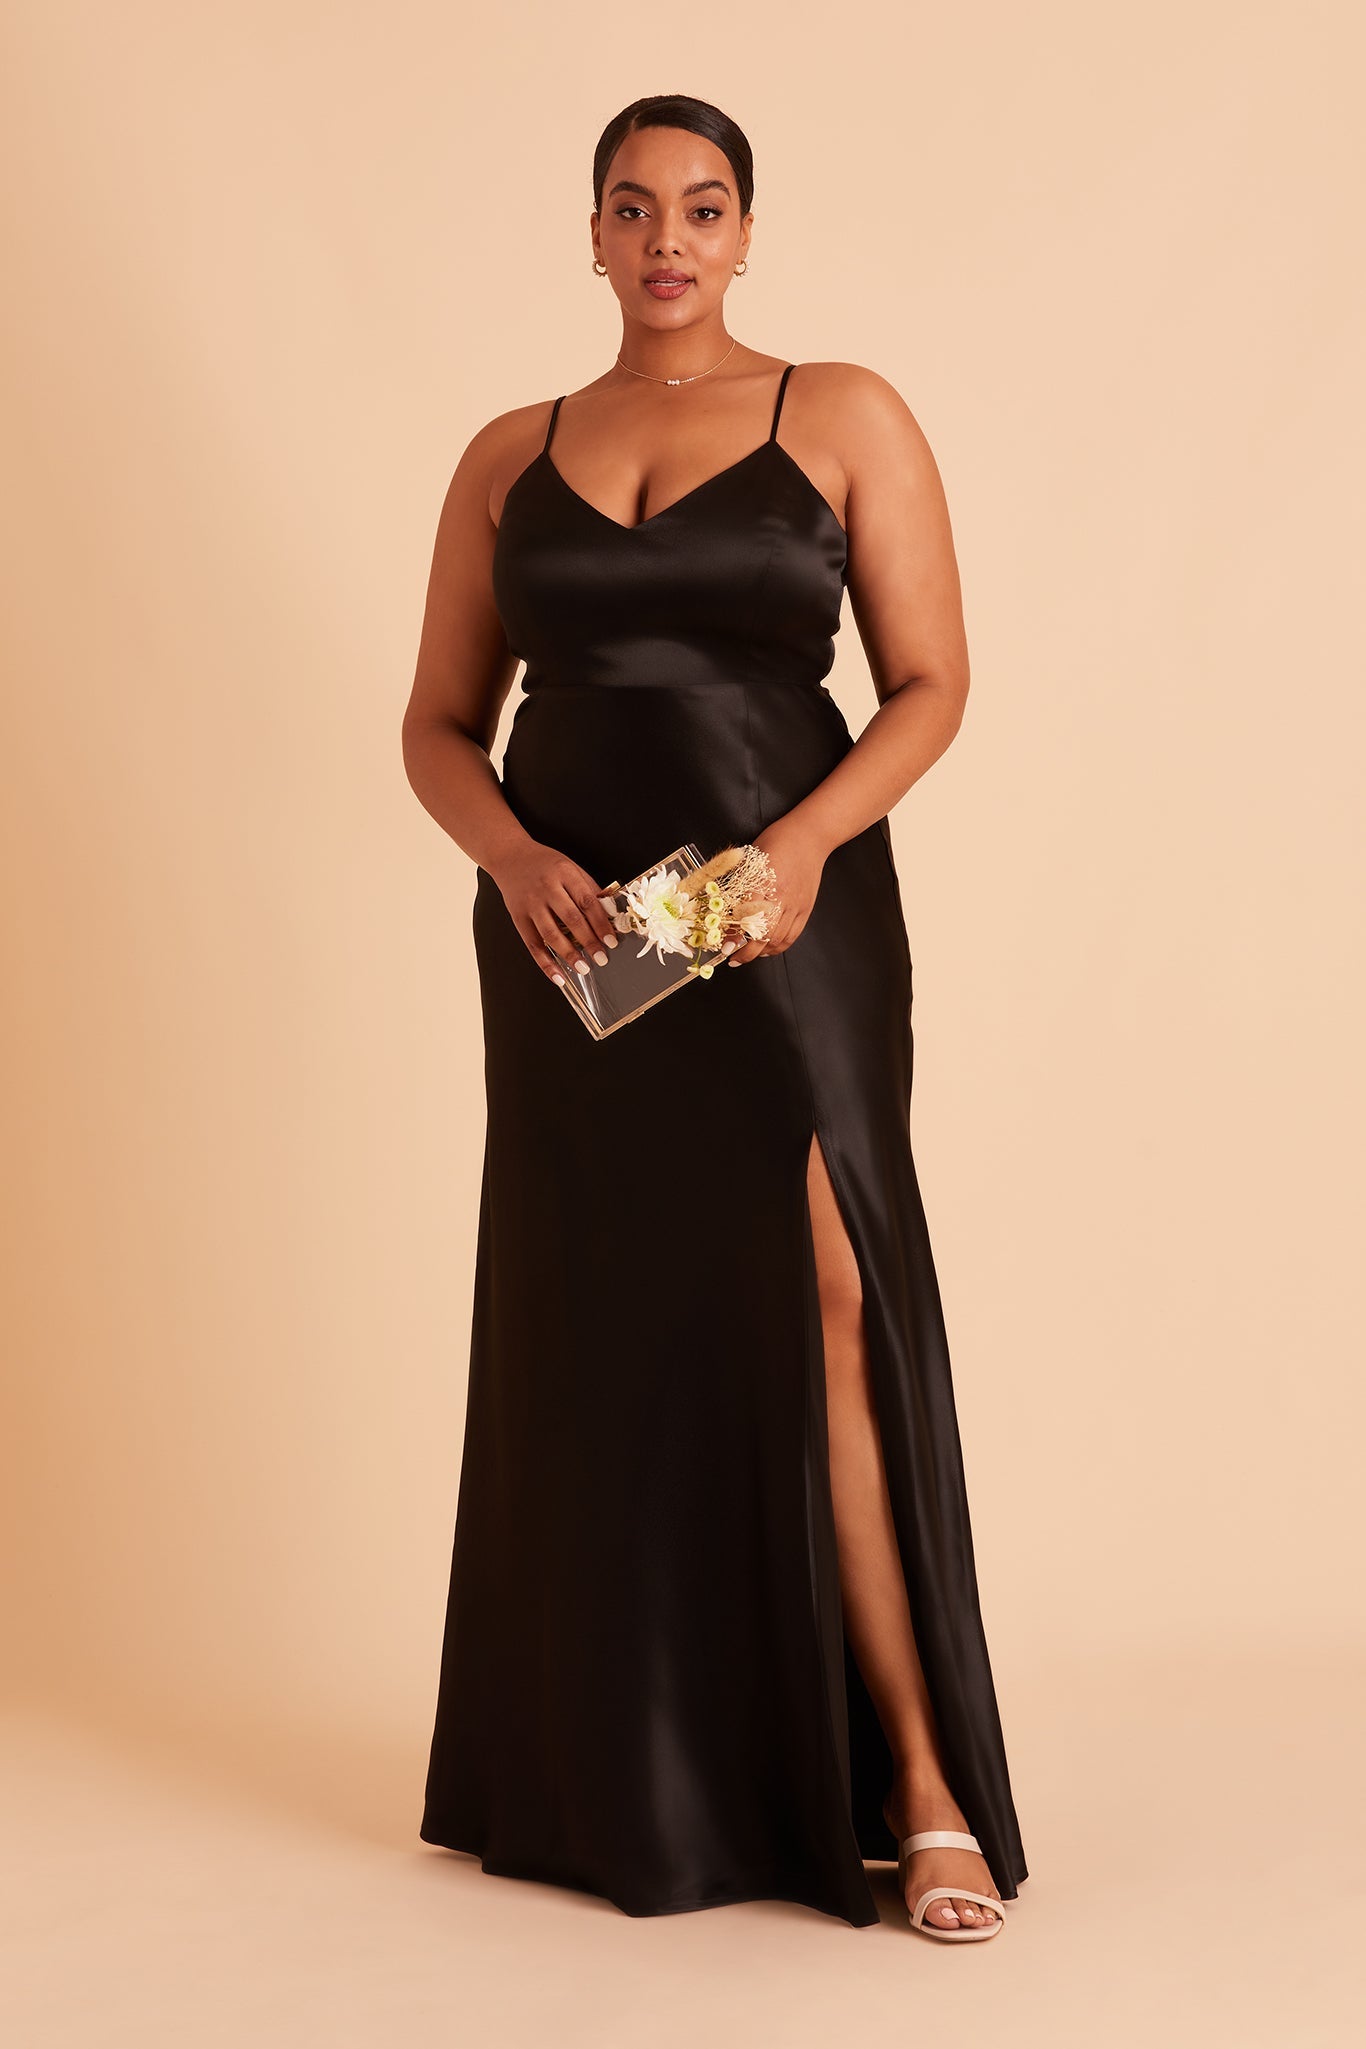 Jay plus size bridesmaid dress with slit in black satin by Birdy Grey, front view